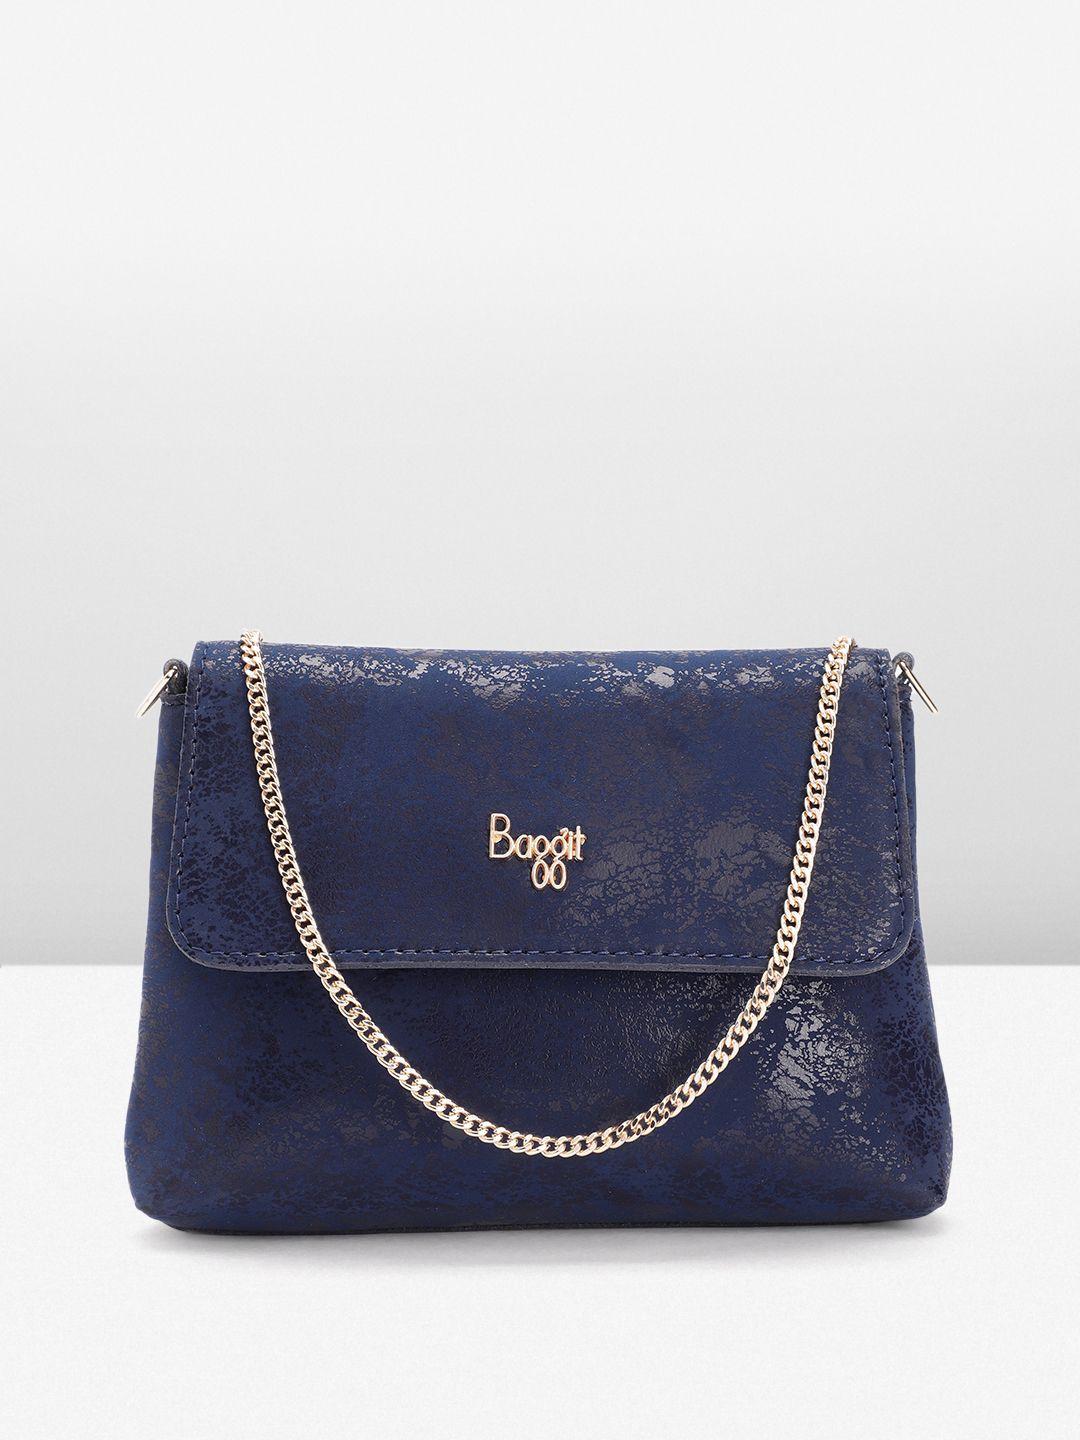 baggit textured foldover clutch with detachable strap